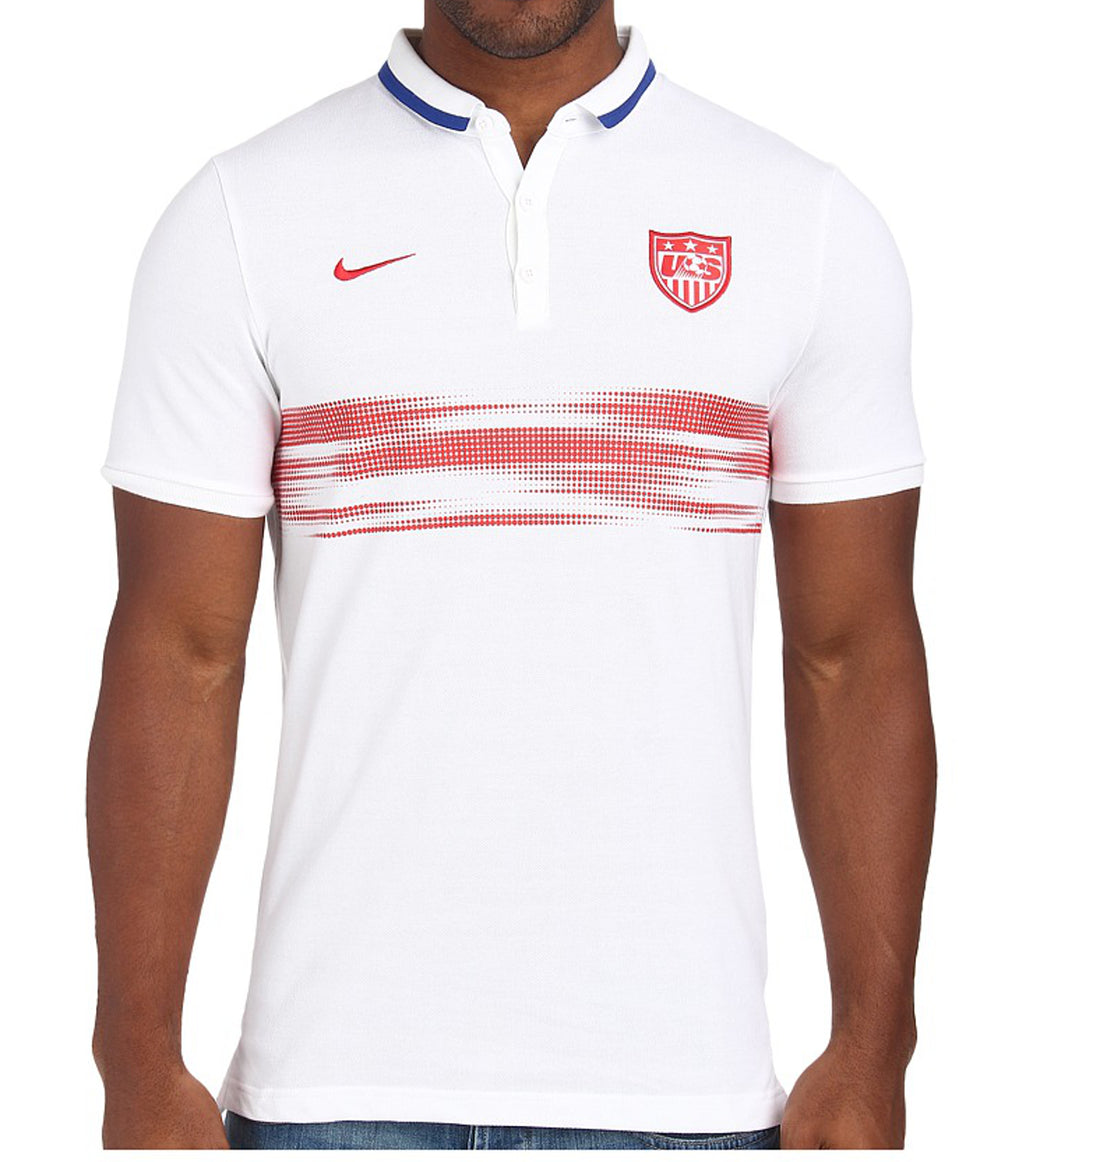 Nike Mens Authentic Soccer Polo T Shirt